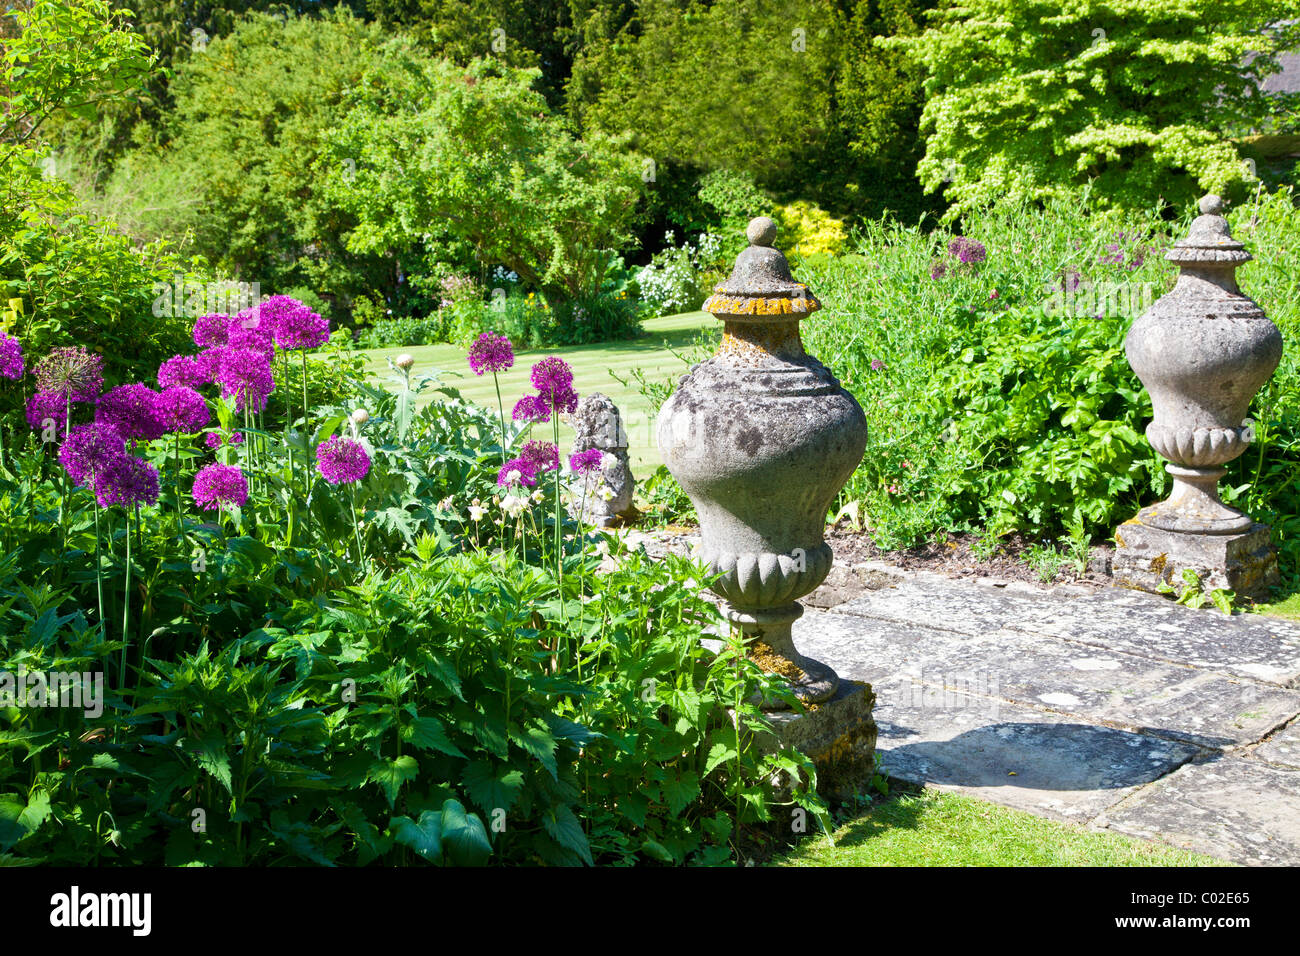 Stone garden ornaments and purple allium or onion flowers overlooking a lawn in an English country garden in summer Stock Photo